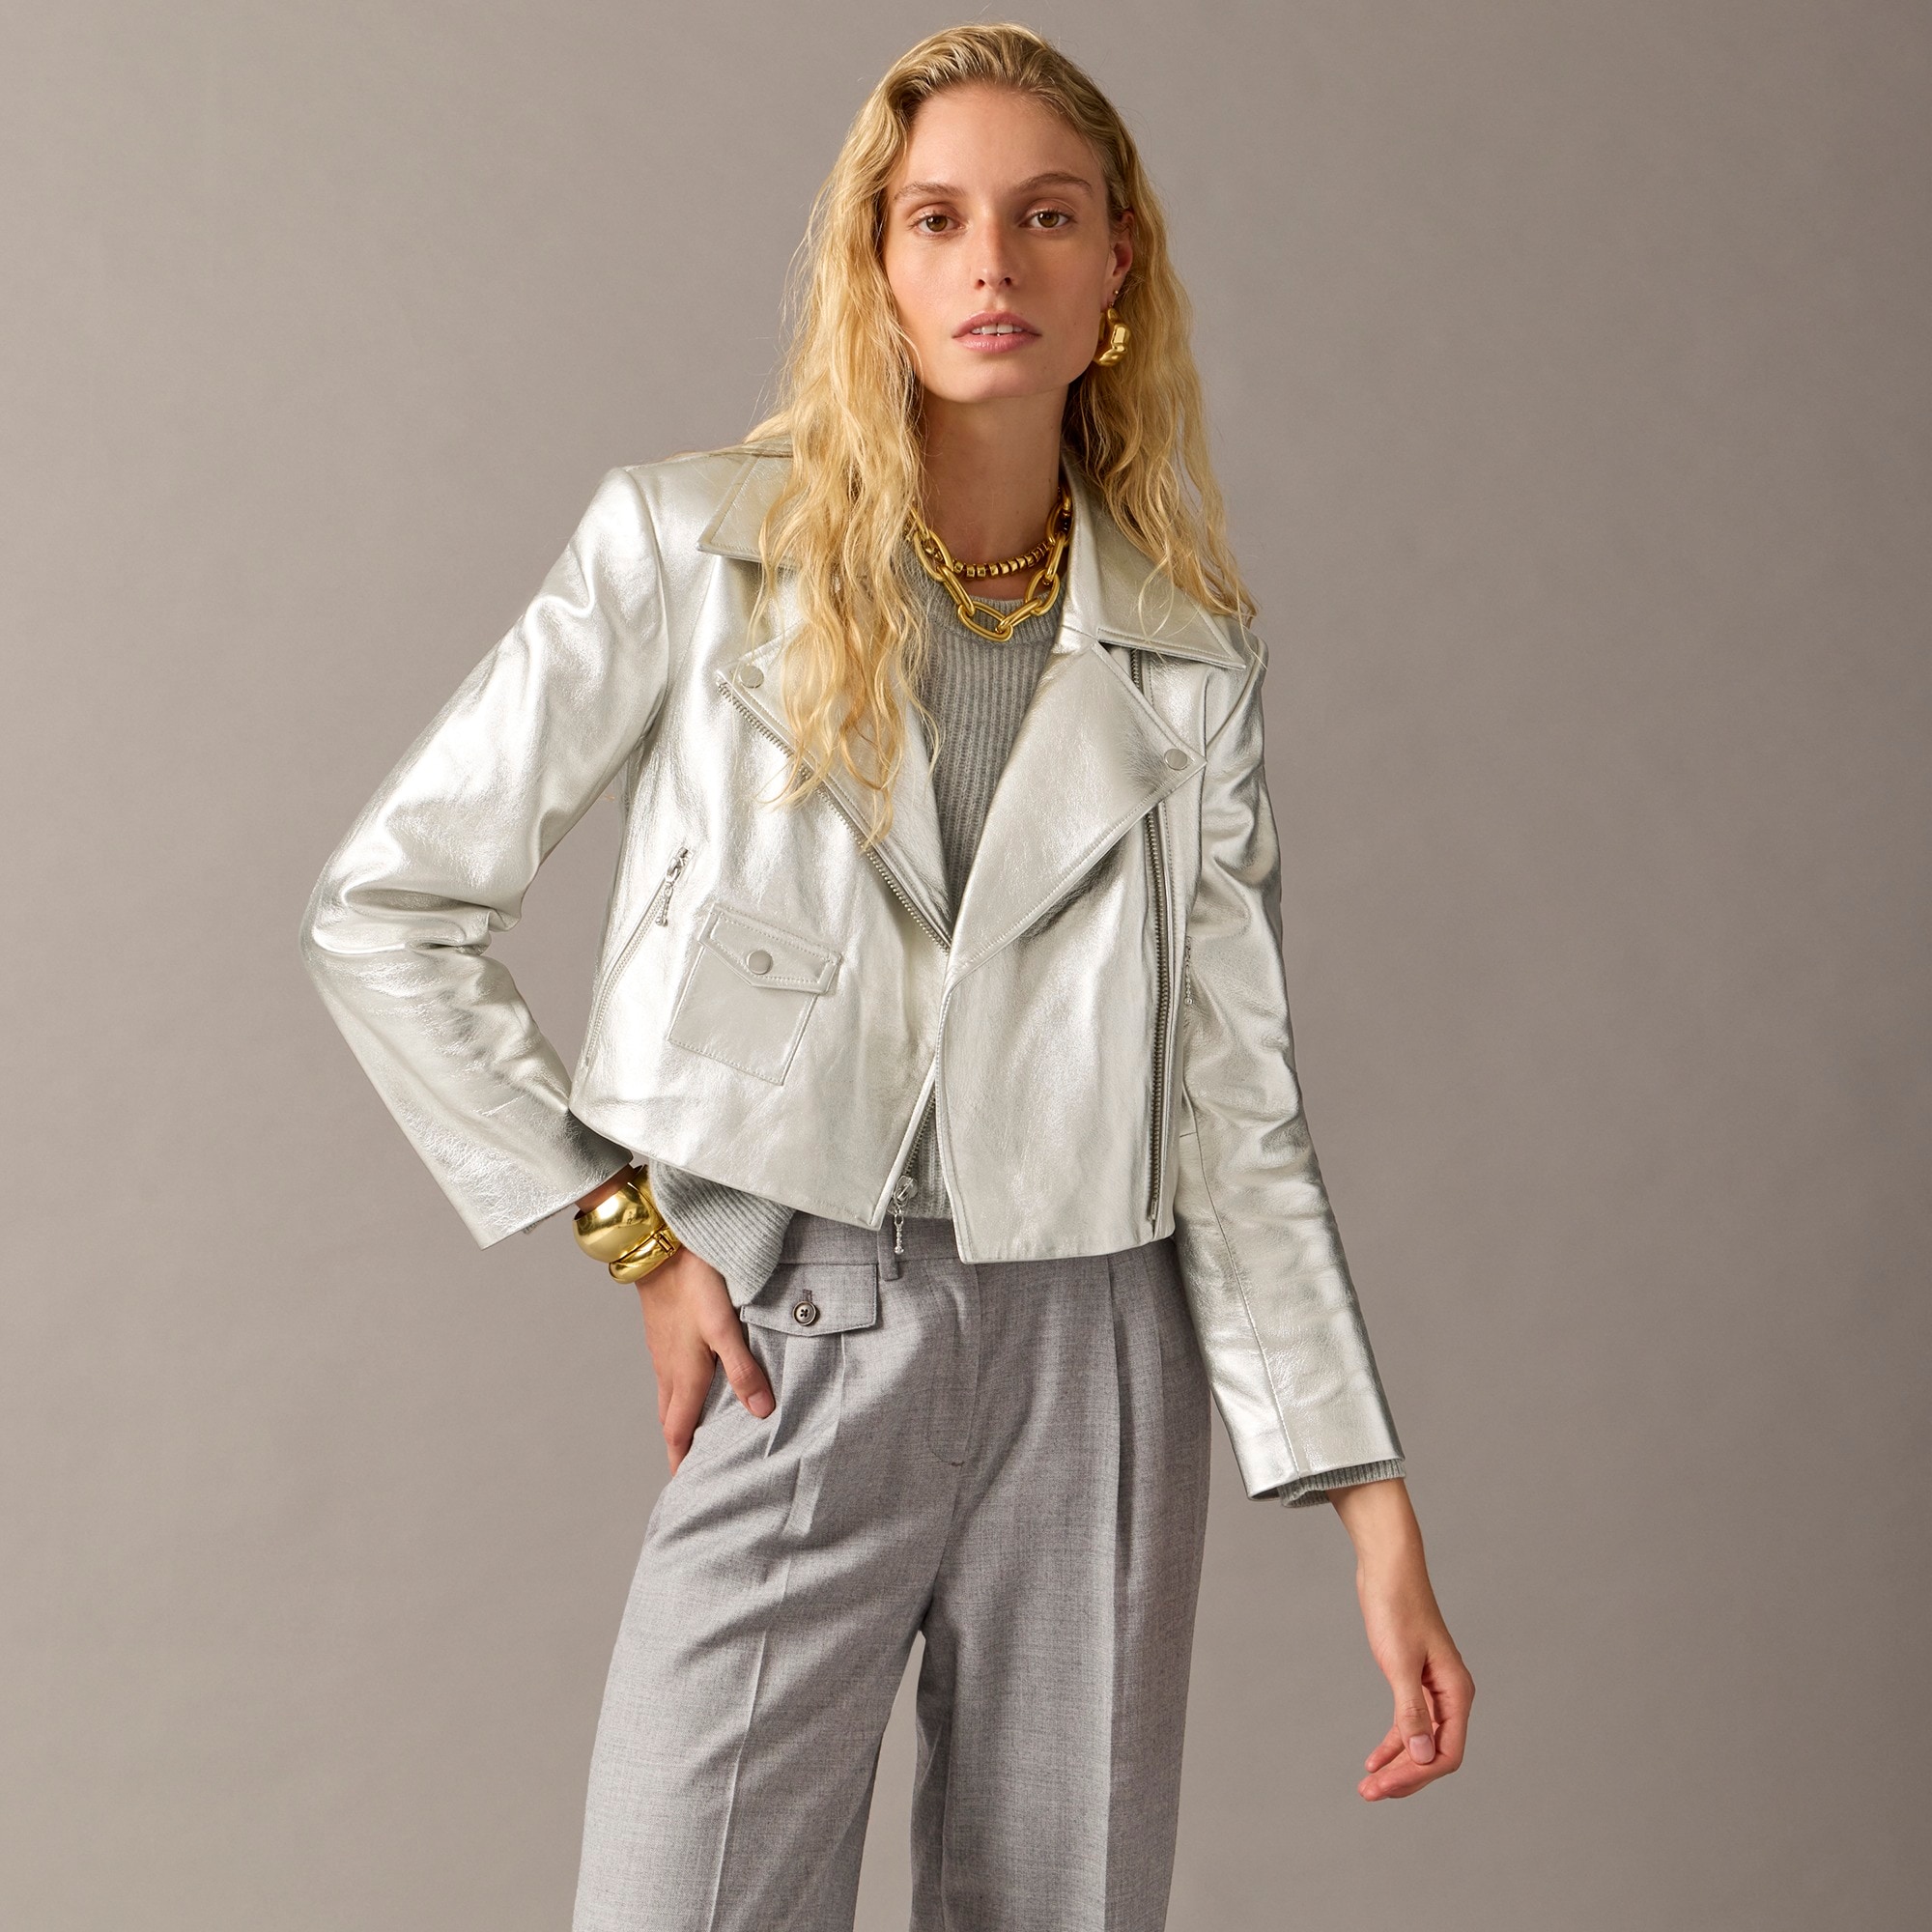 Jcrew Collection limited-edition silver leather jacket